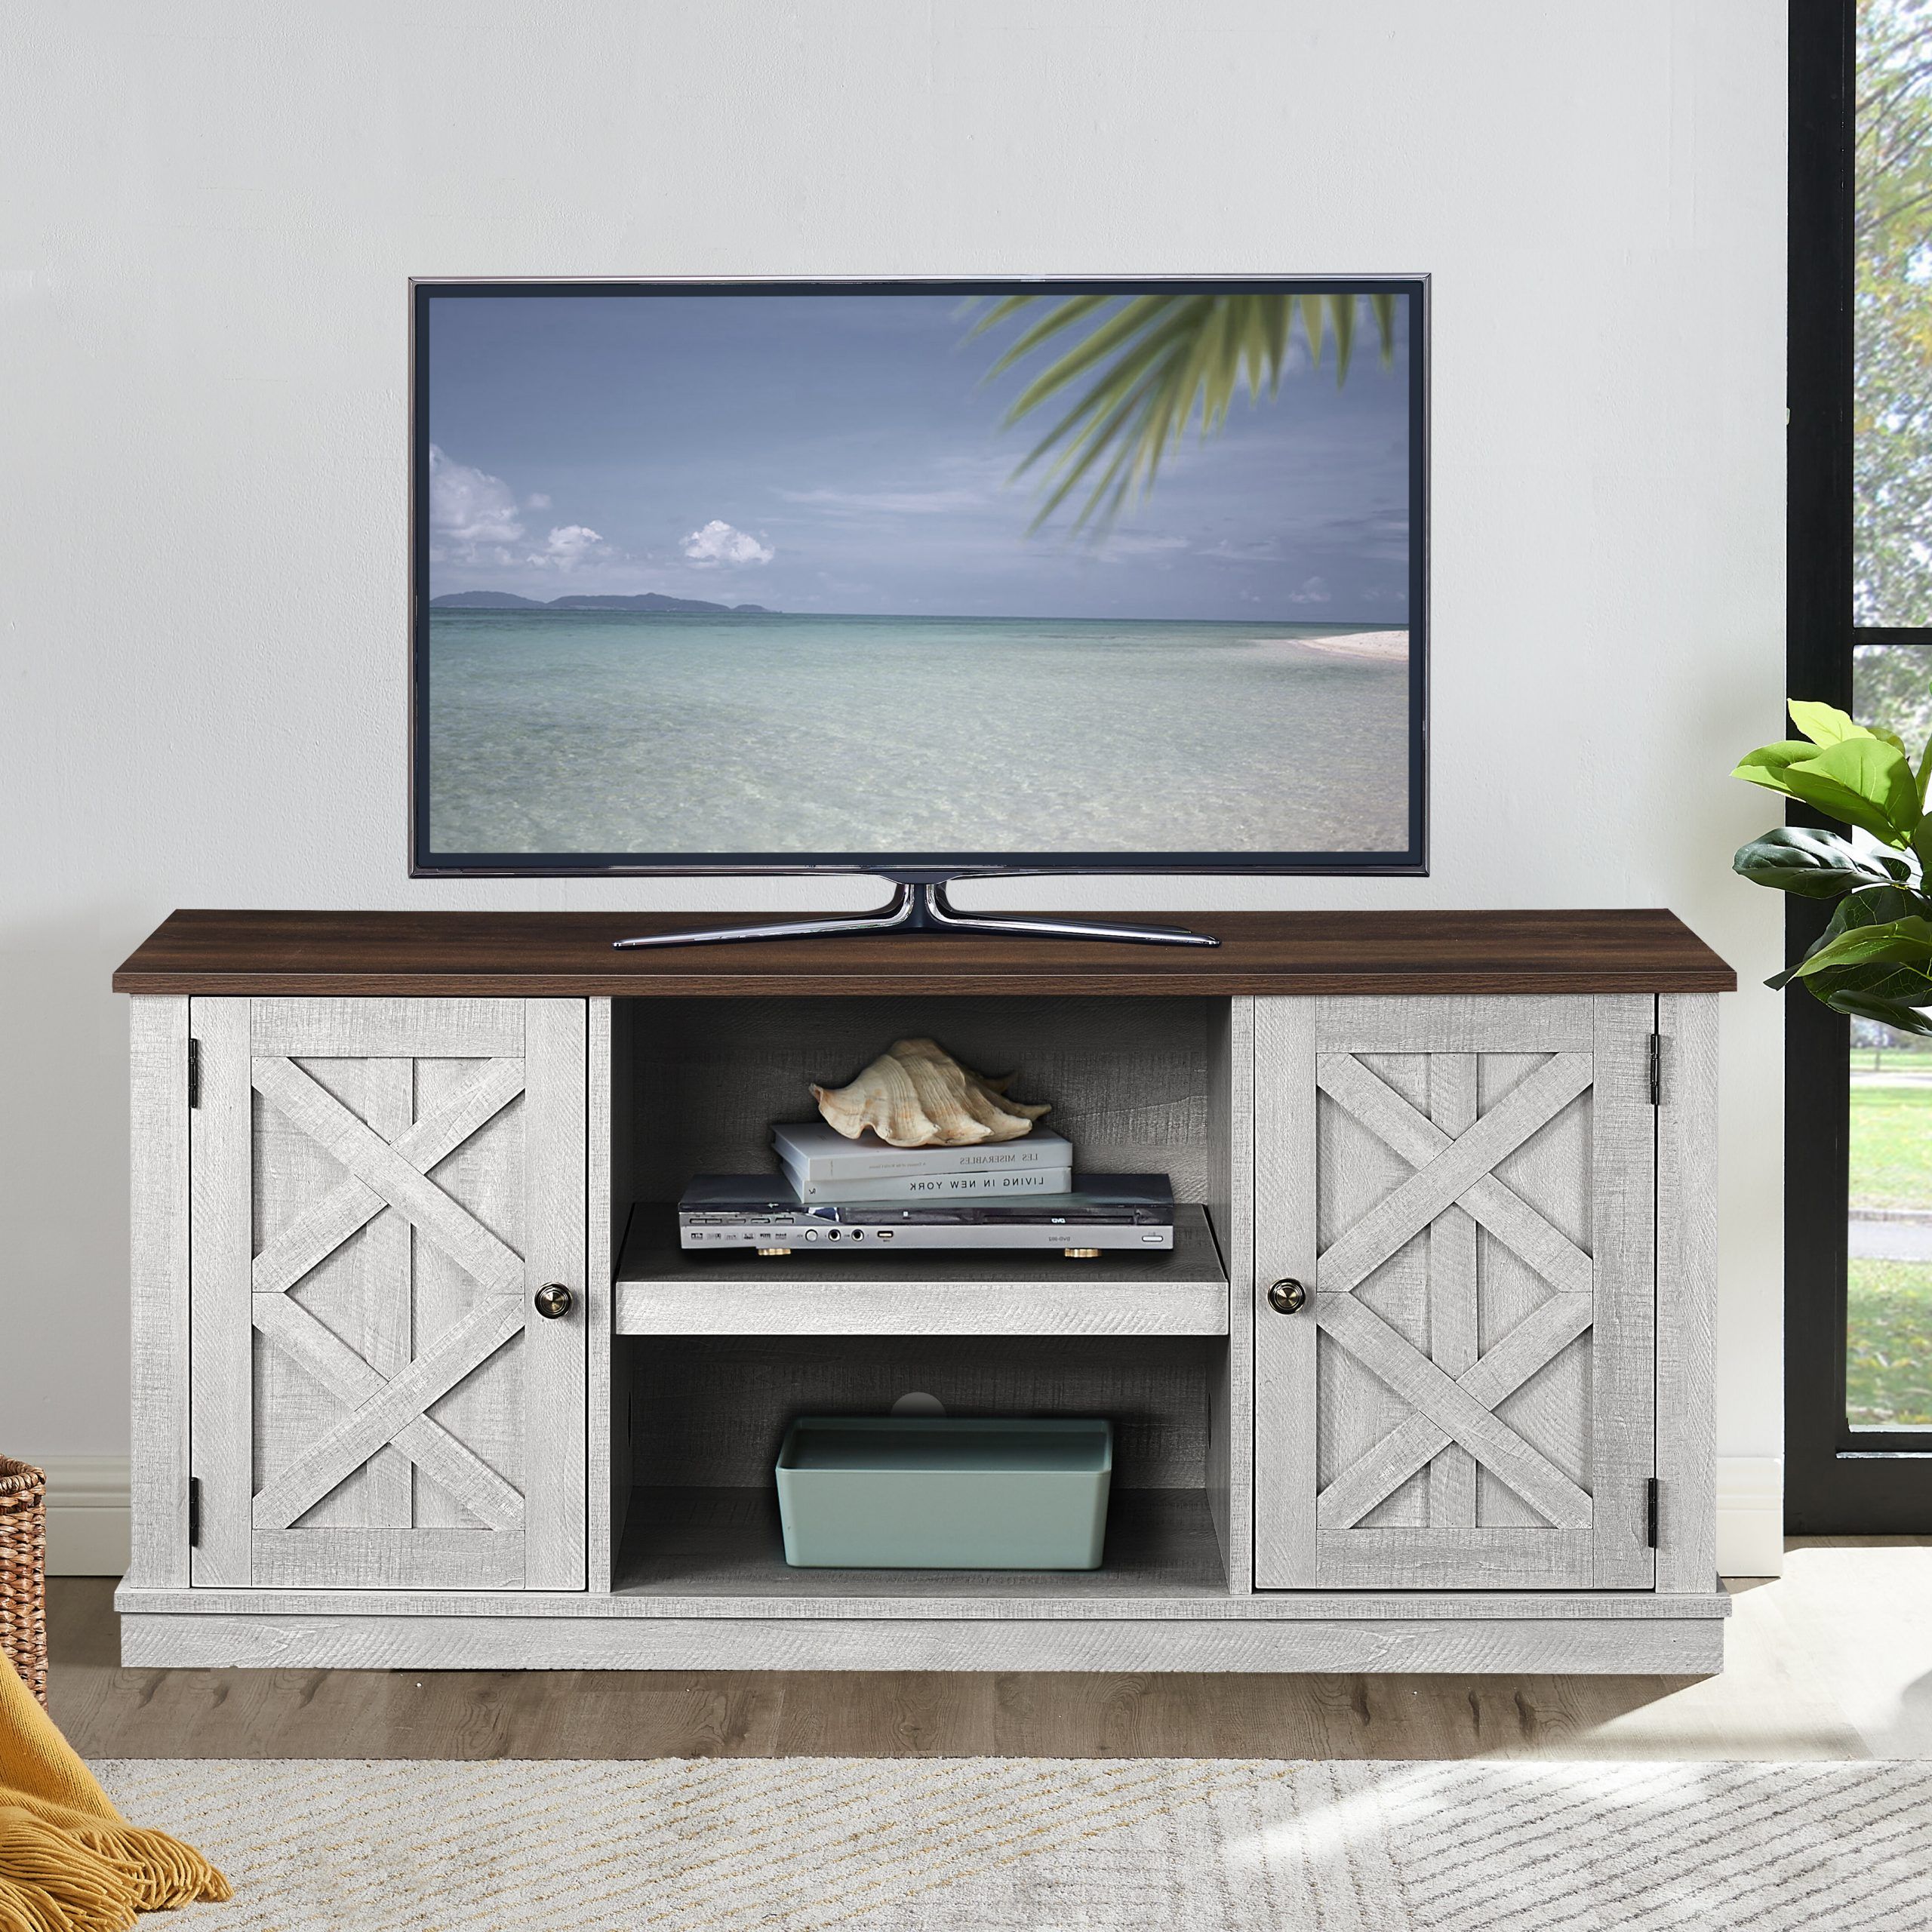 Most Recently Released Gracie Oaks Odine Tv Stand For Tvs Up To 60" & Reviews (View 7 of 10)